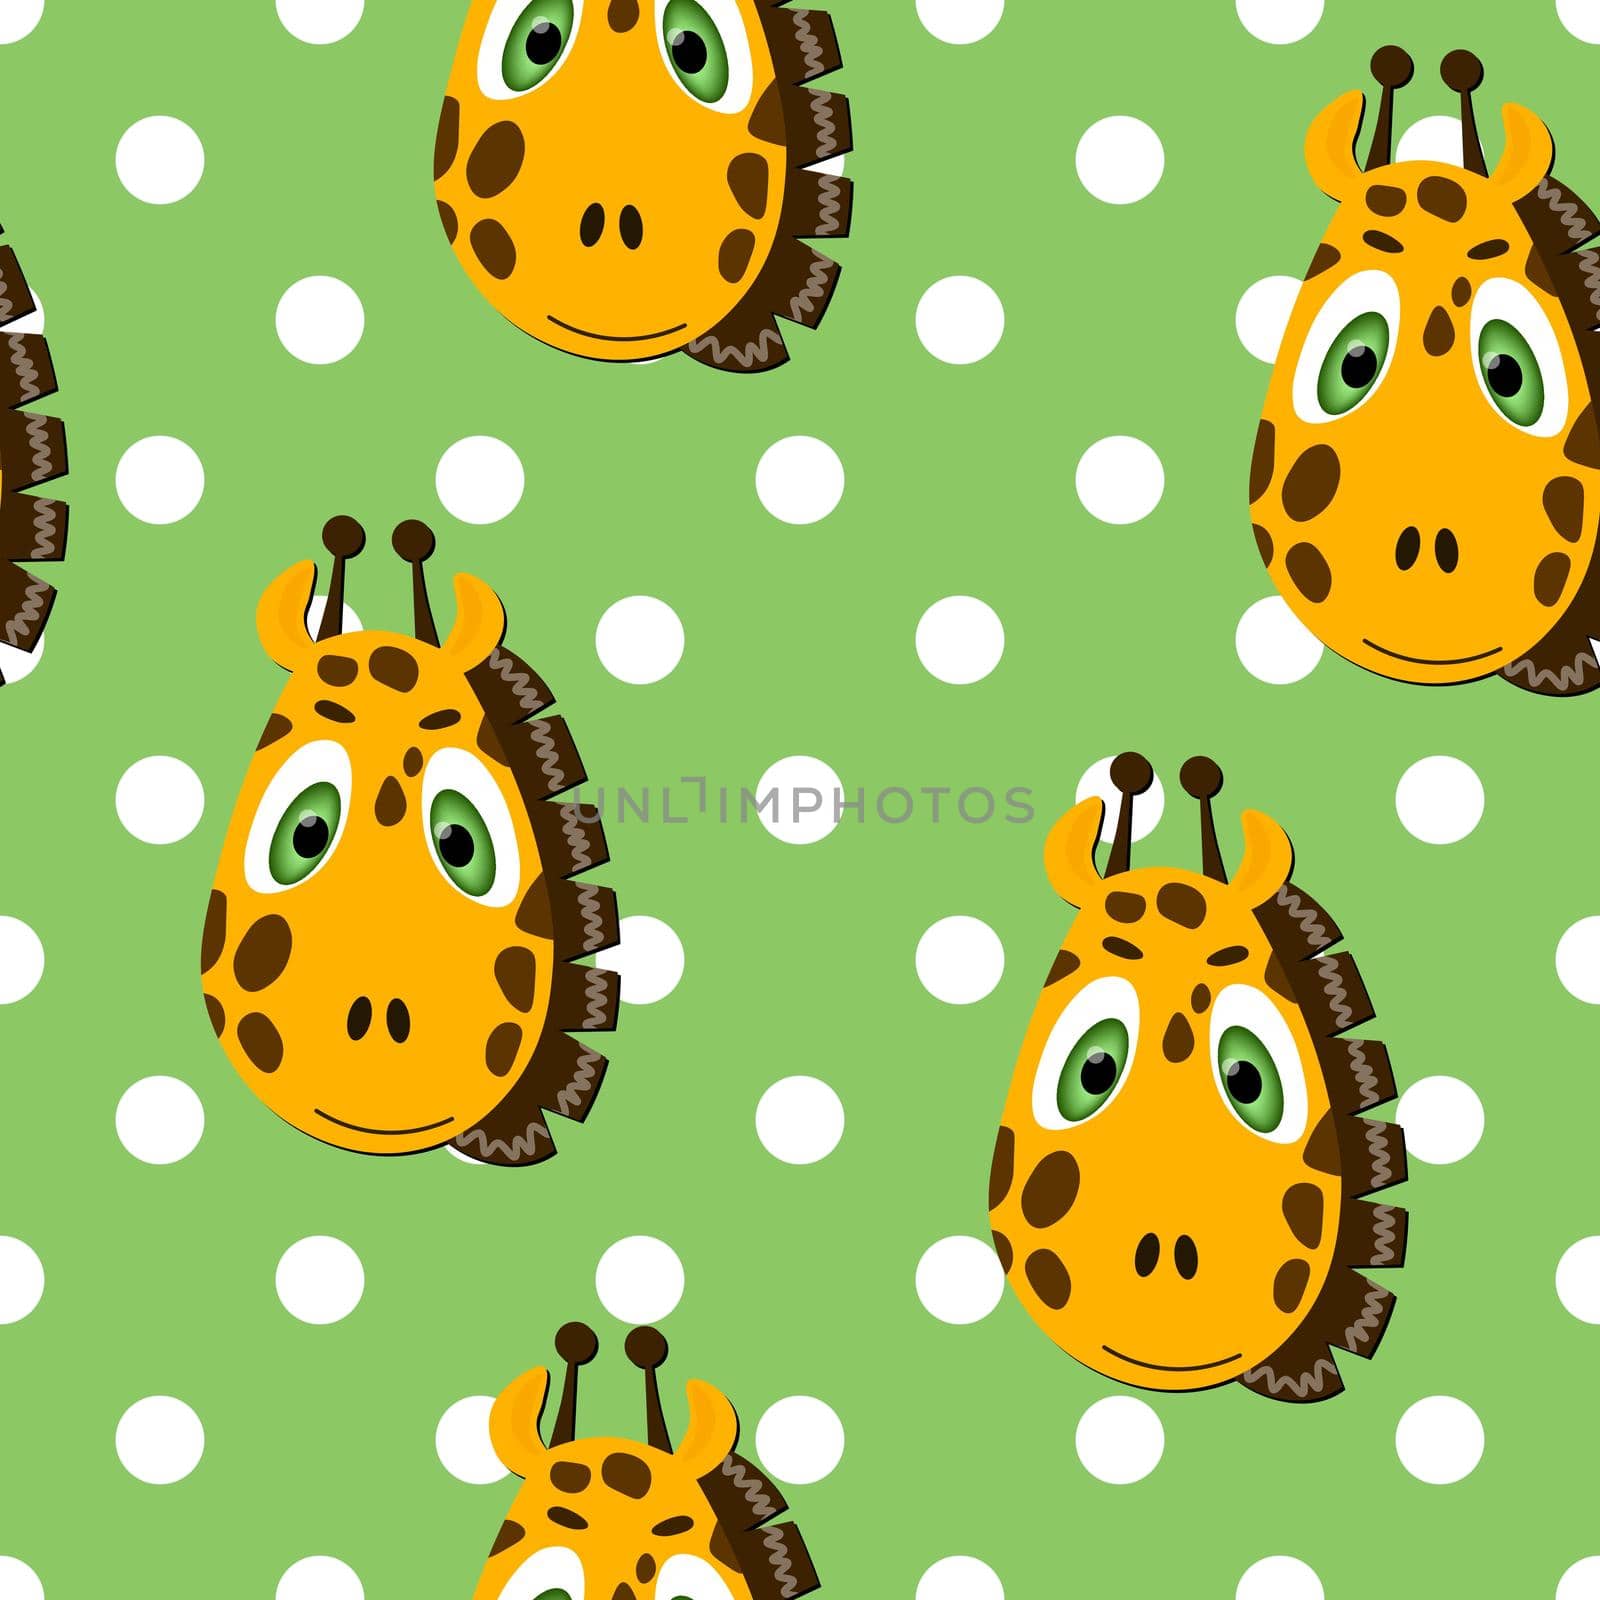 Vector flat animals colorful illustration for kids. Seamless pattern with cute giraffe face on green polka dots background. Adorable cartoon character. Design for card, poster, fabric, textile